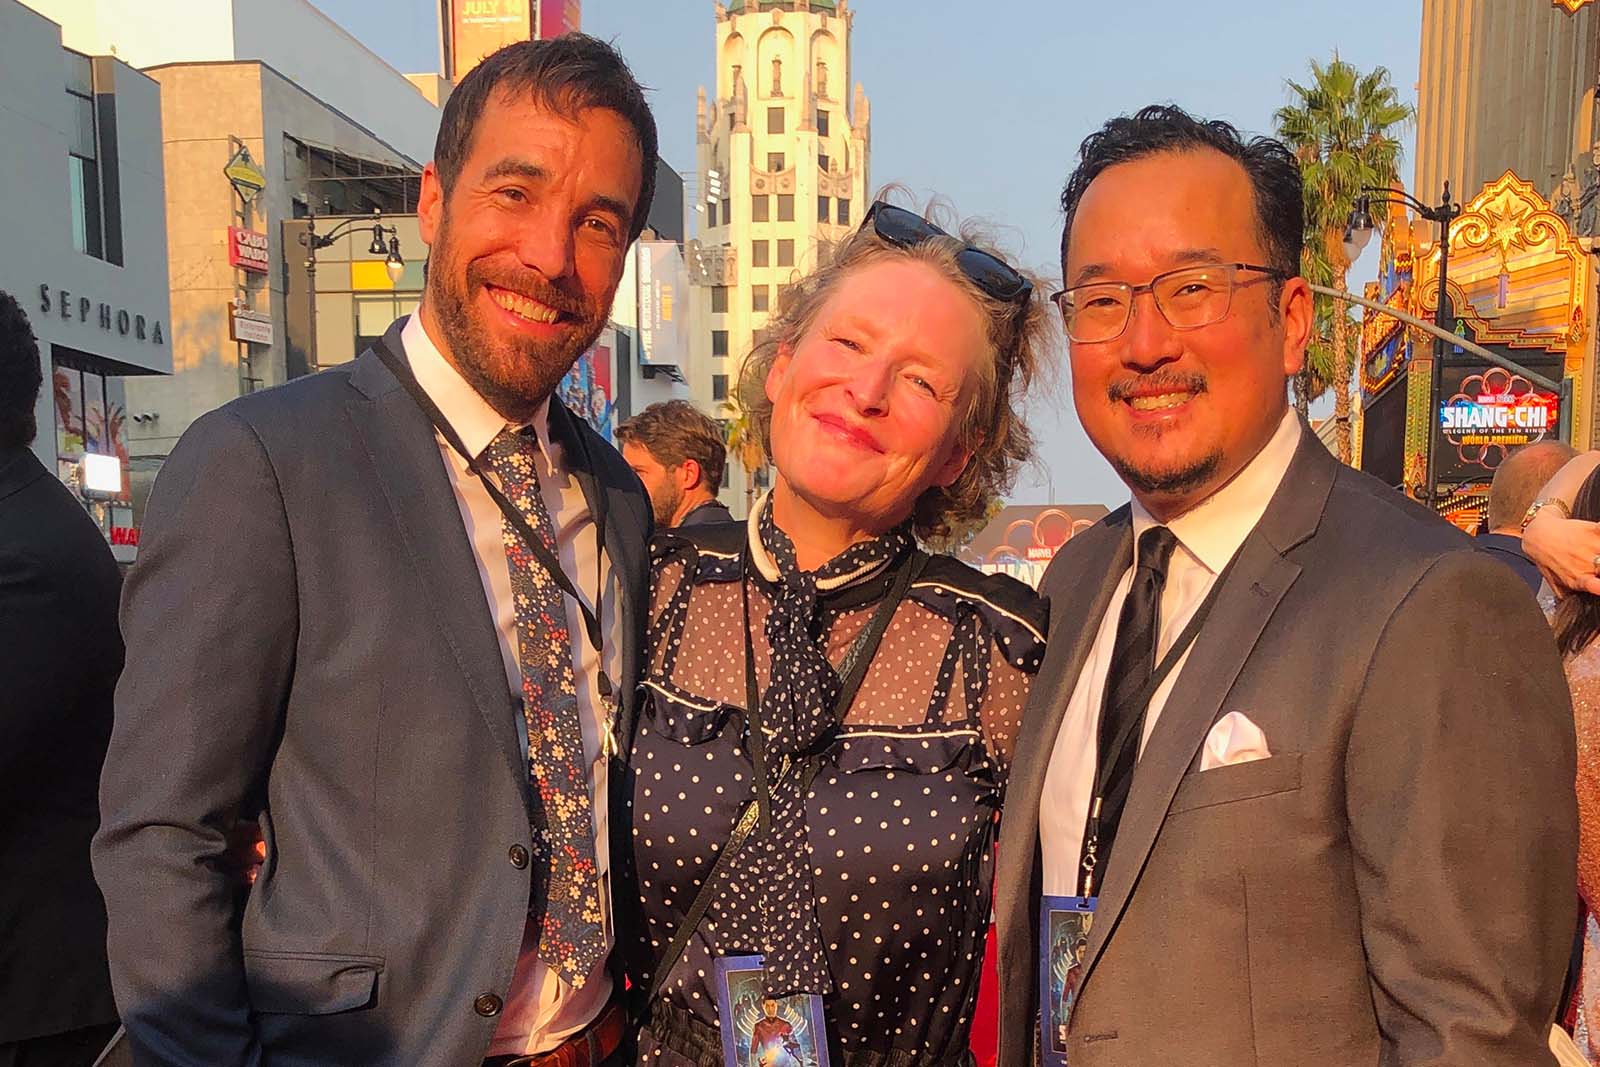 Harry Yoon (R) seen here with Nat Sanders and Elízabet Ronaldsdóttir at the Shang-Chi premiere.